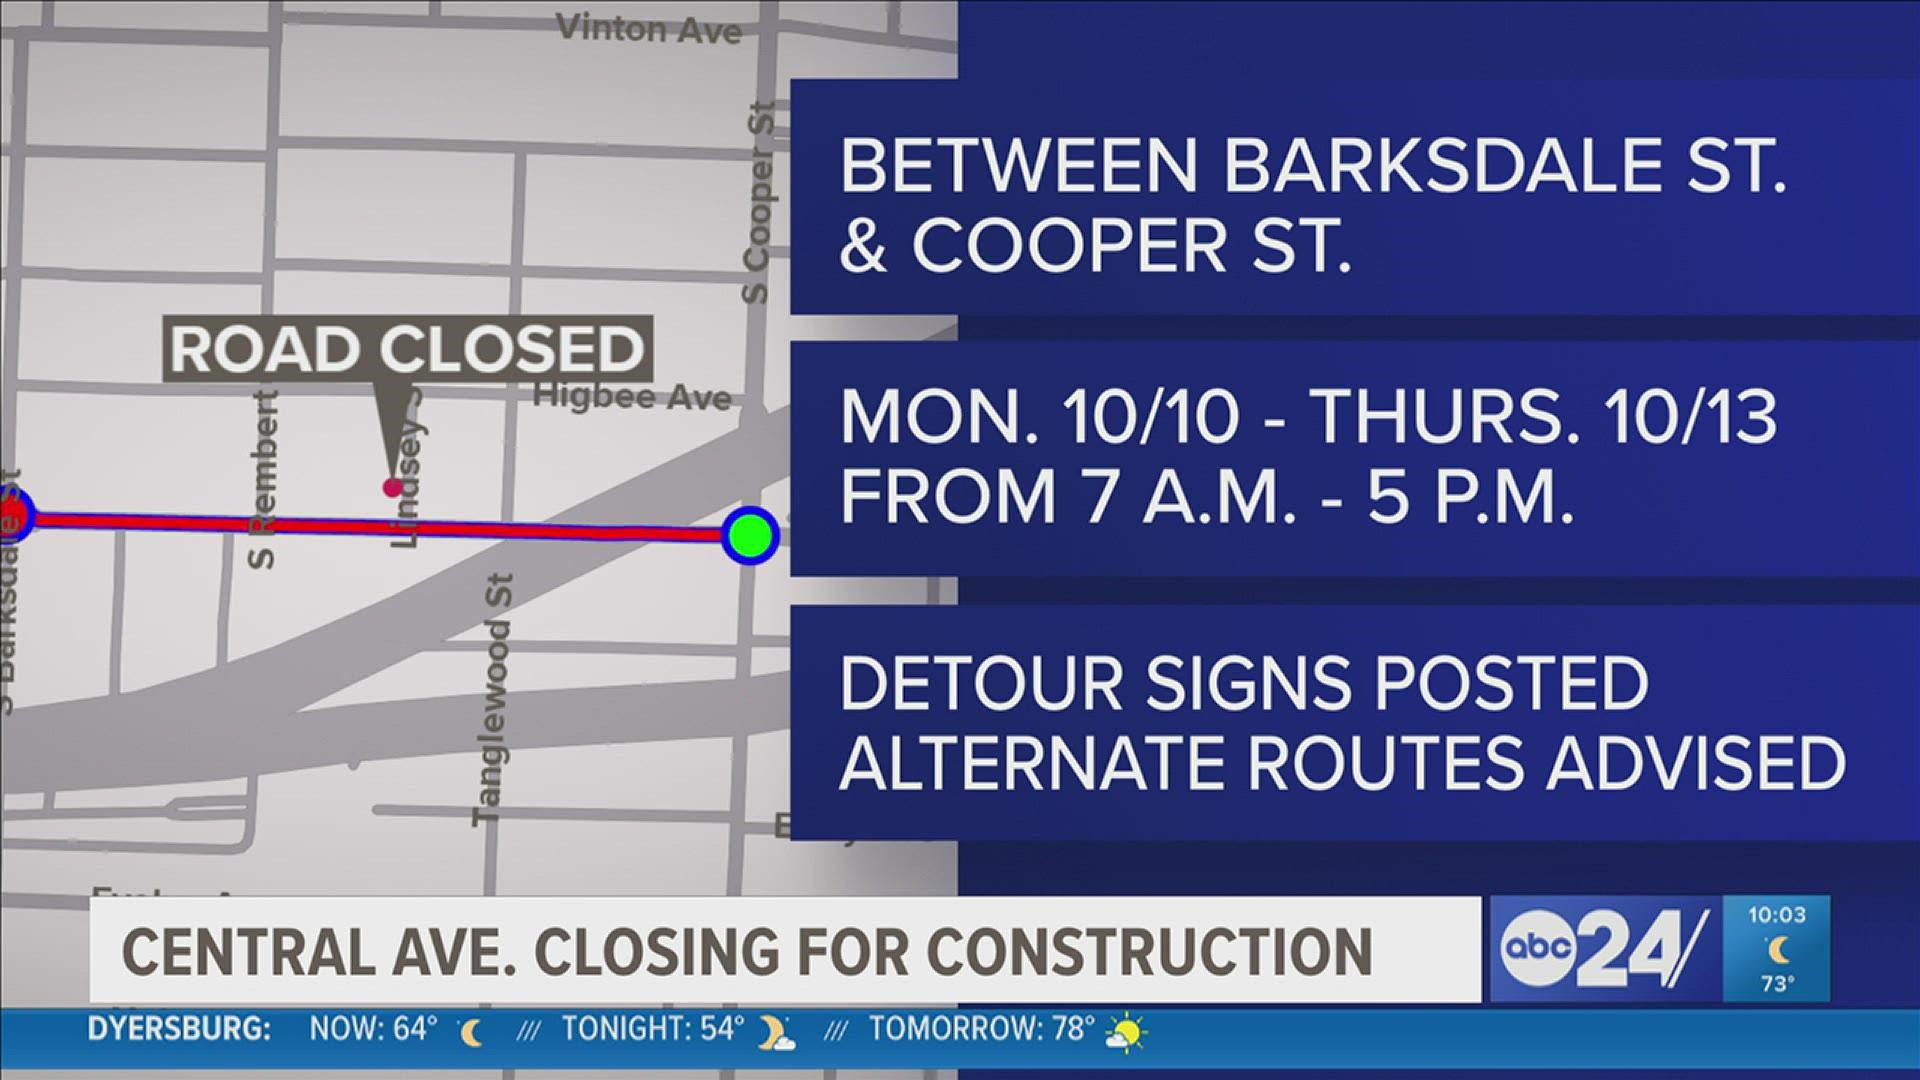 Drivers who normally use Central Avenue between Barksdale Street and Cooper Street should use a different route during the days of the closure.